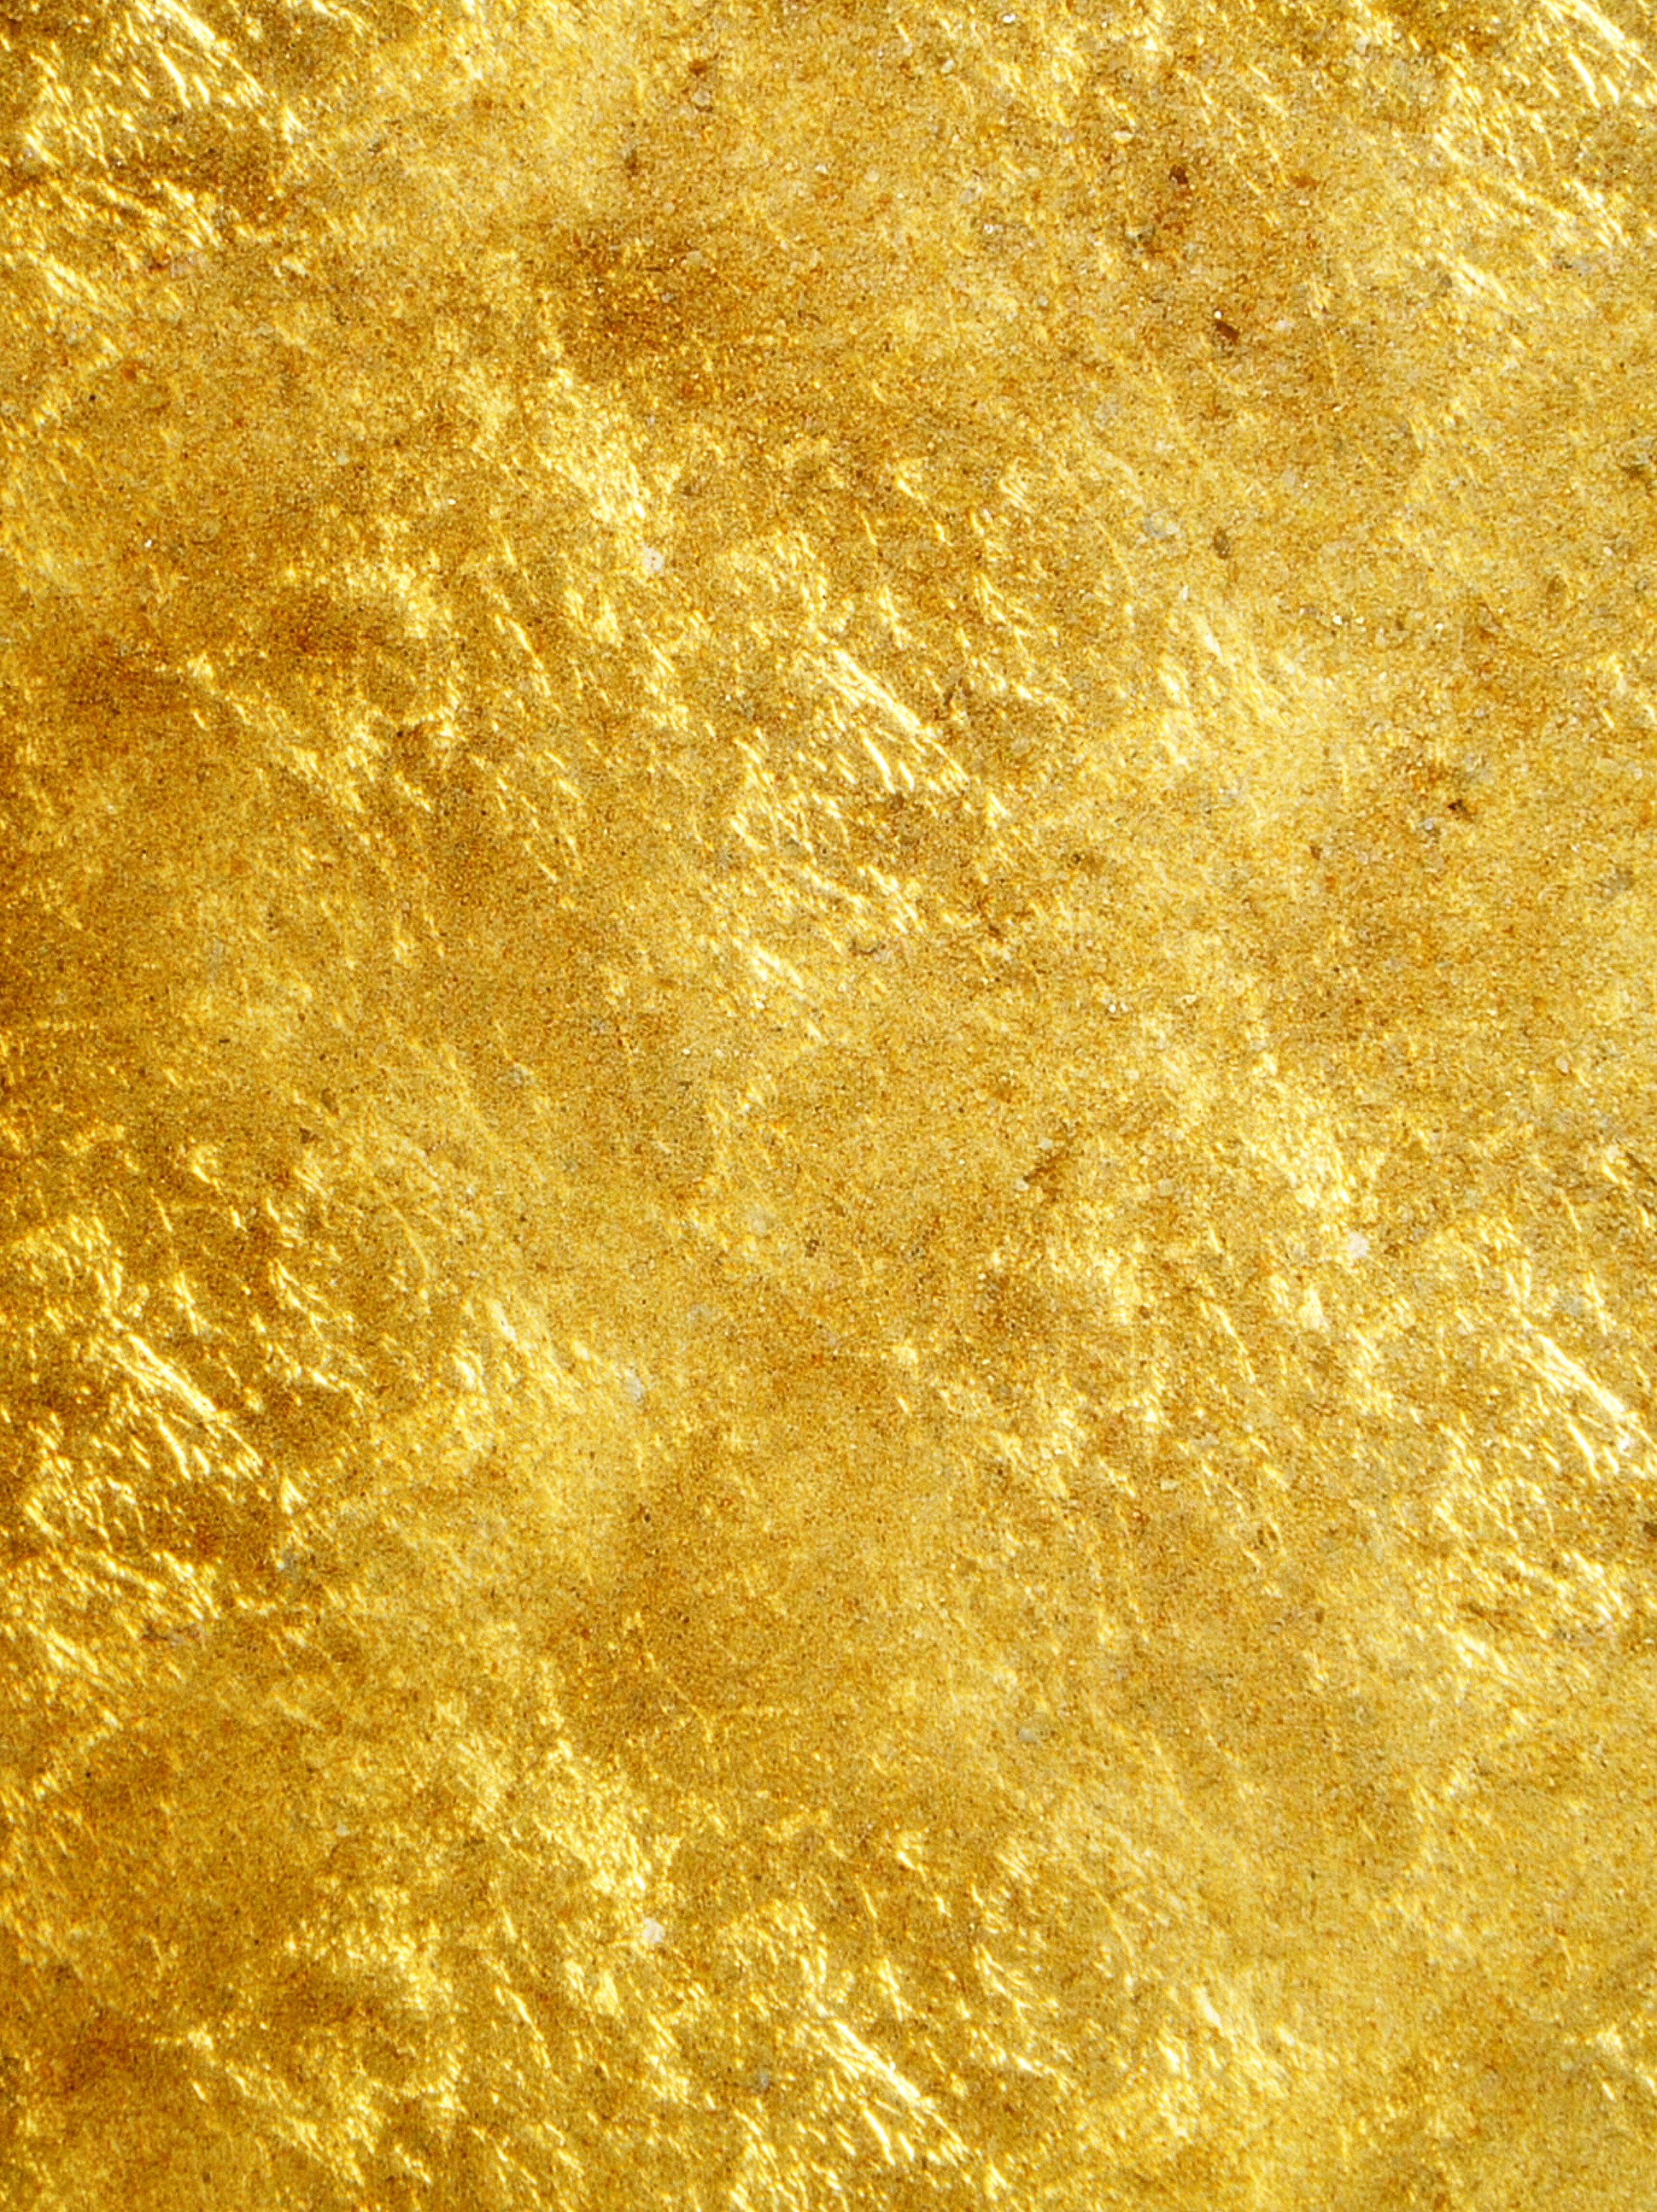 Metallic Gold background ·① Download free awesome High ...